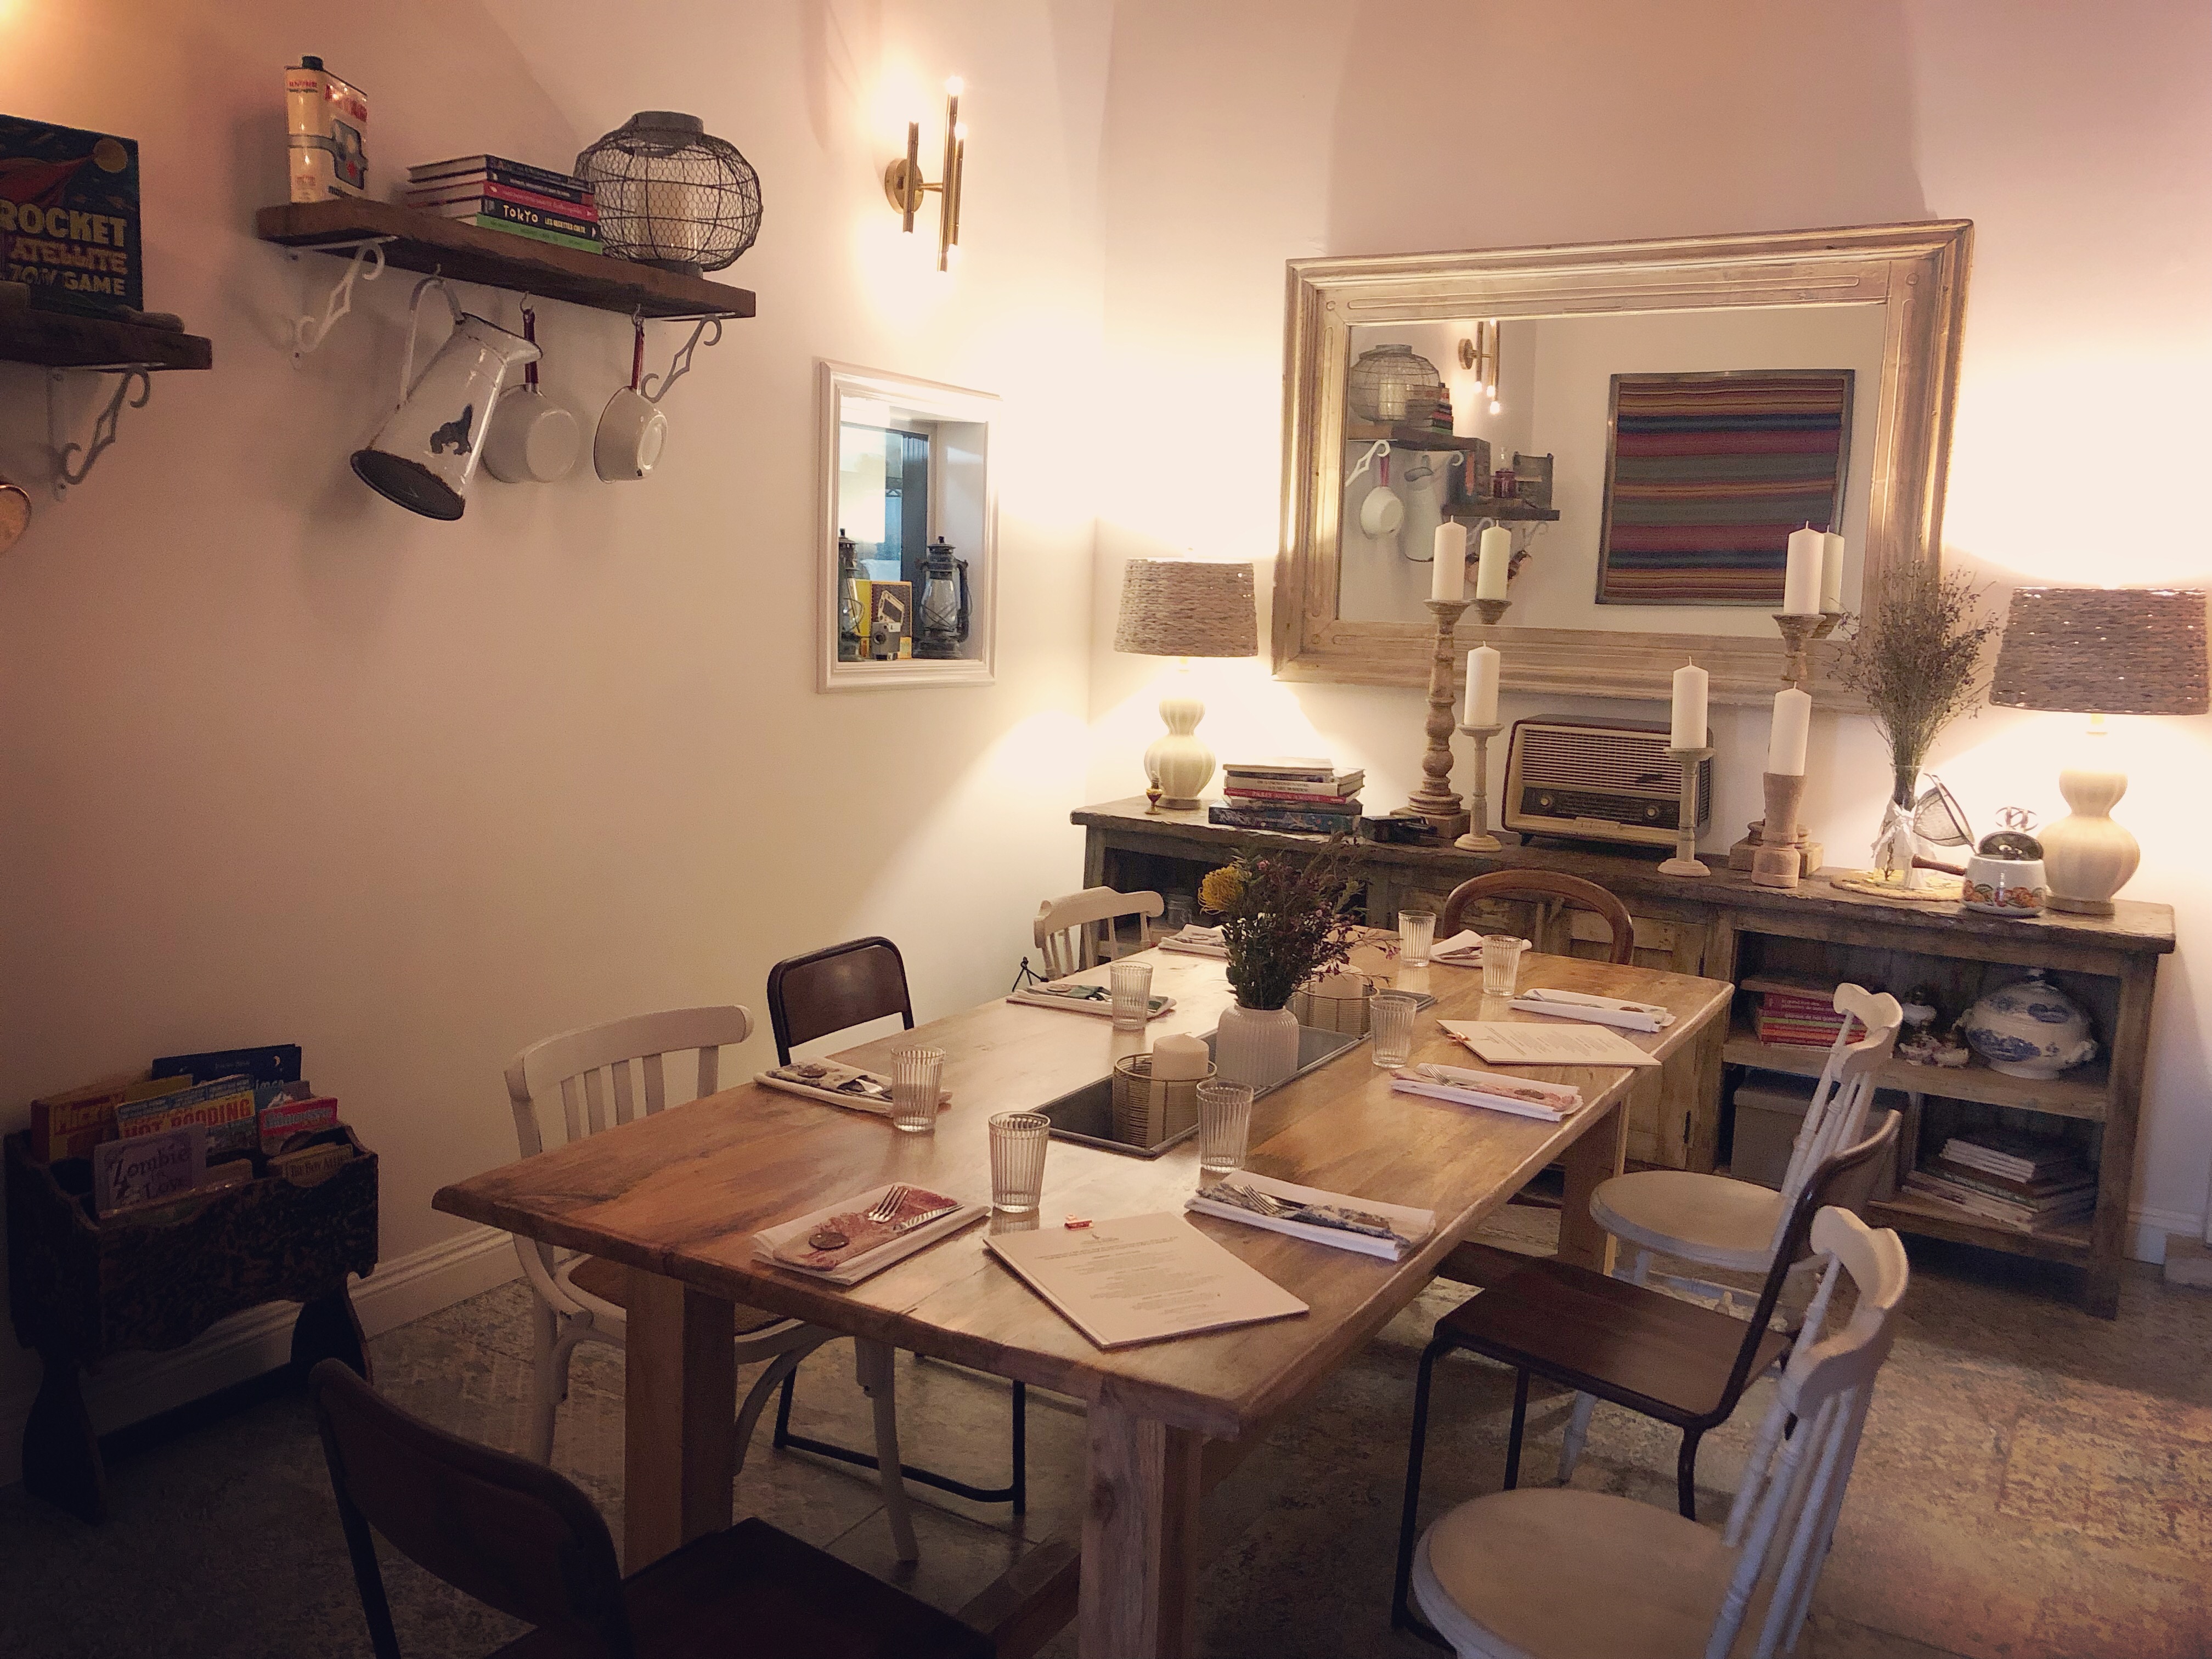 Loupiottes nook for private dinners or larger groups